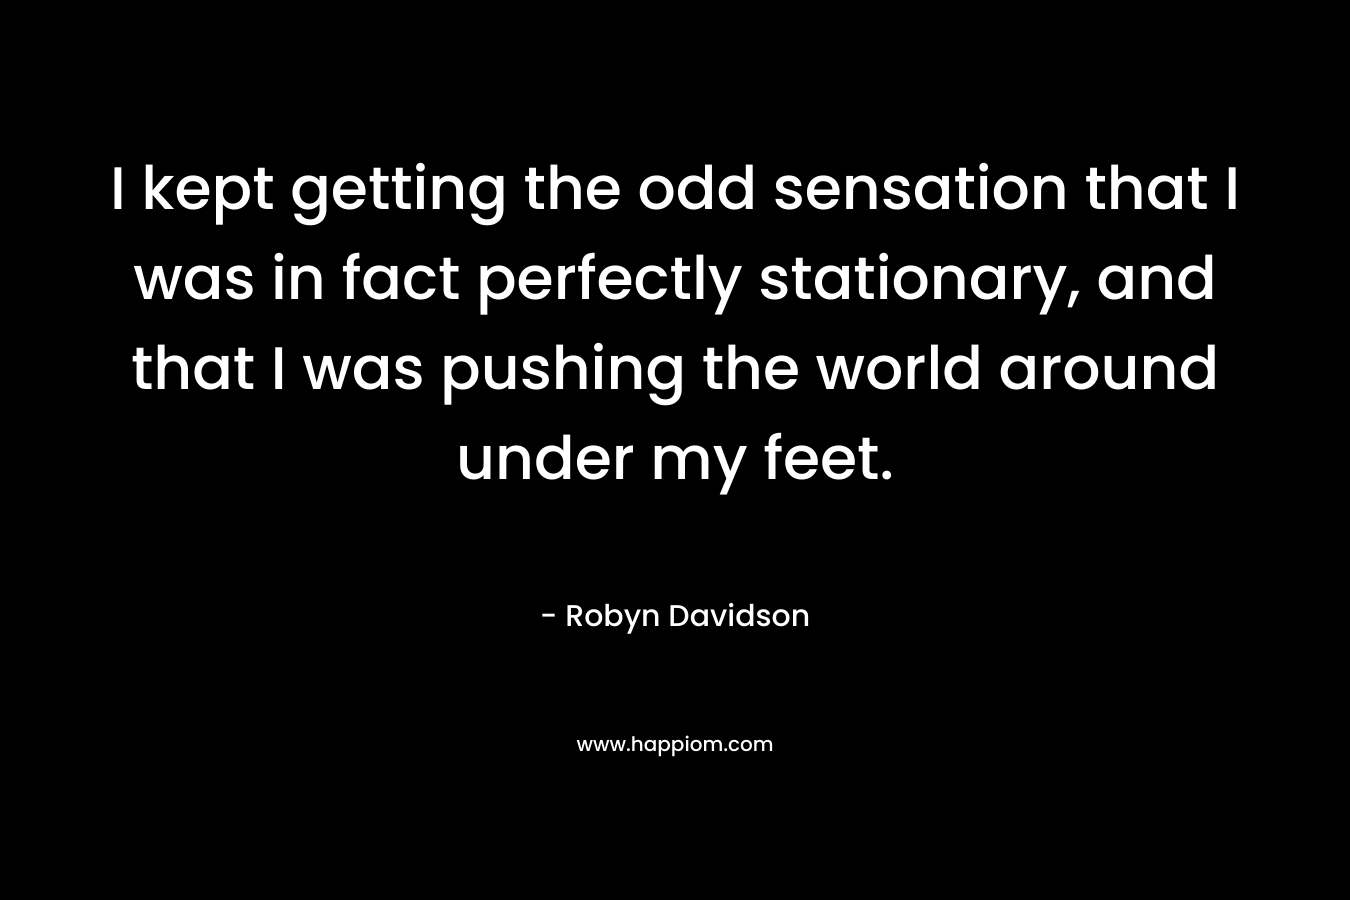 I kept getting the odd sensation that I was in fact perfectly stationary, and that I was pushing the world around under my feet. – Robyn Davidson